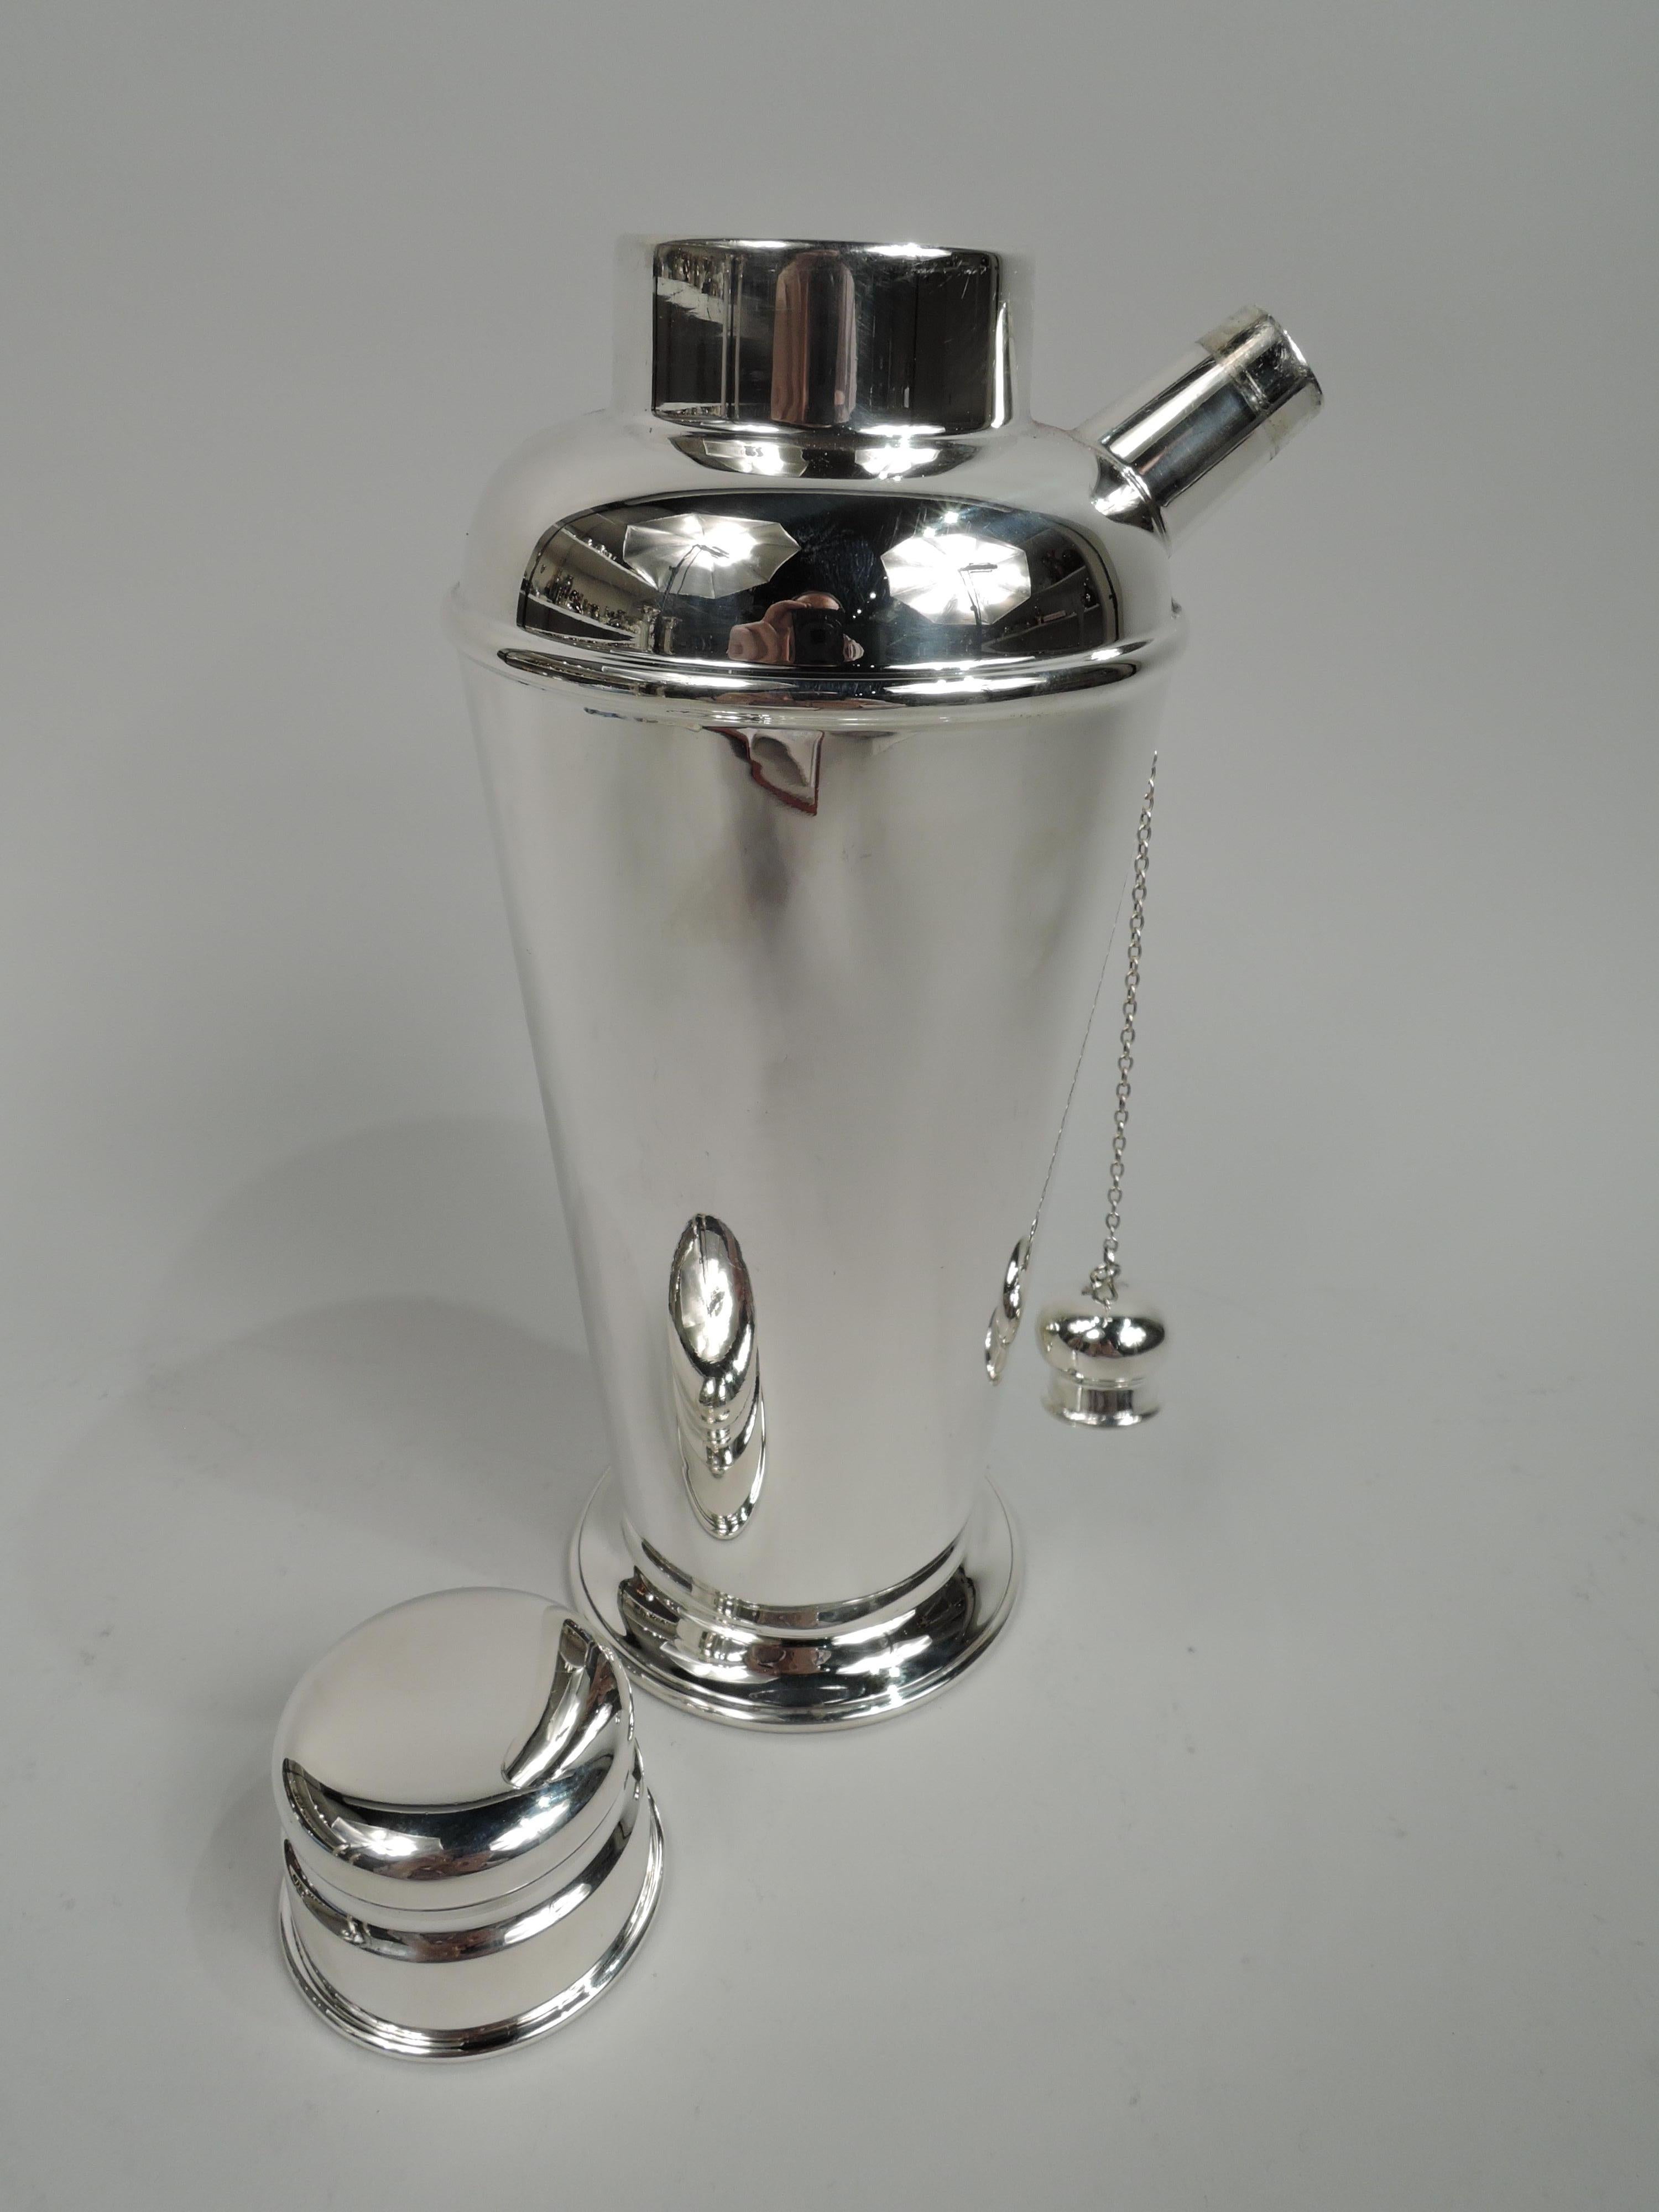 Art Deco sterling silver cocktail shaker. Made by Currier & Roby in New York, ca 1925. Straight and tapering sides and skirted foot; curved shoulder, stubby diagonal spout with built-in strainer and chained cap, and inset neck with snug-fitting cap.